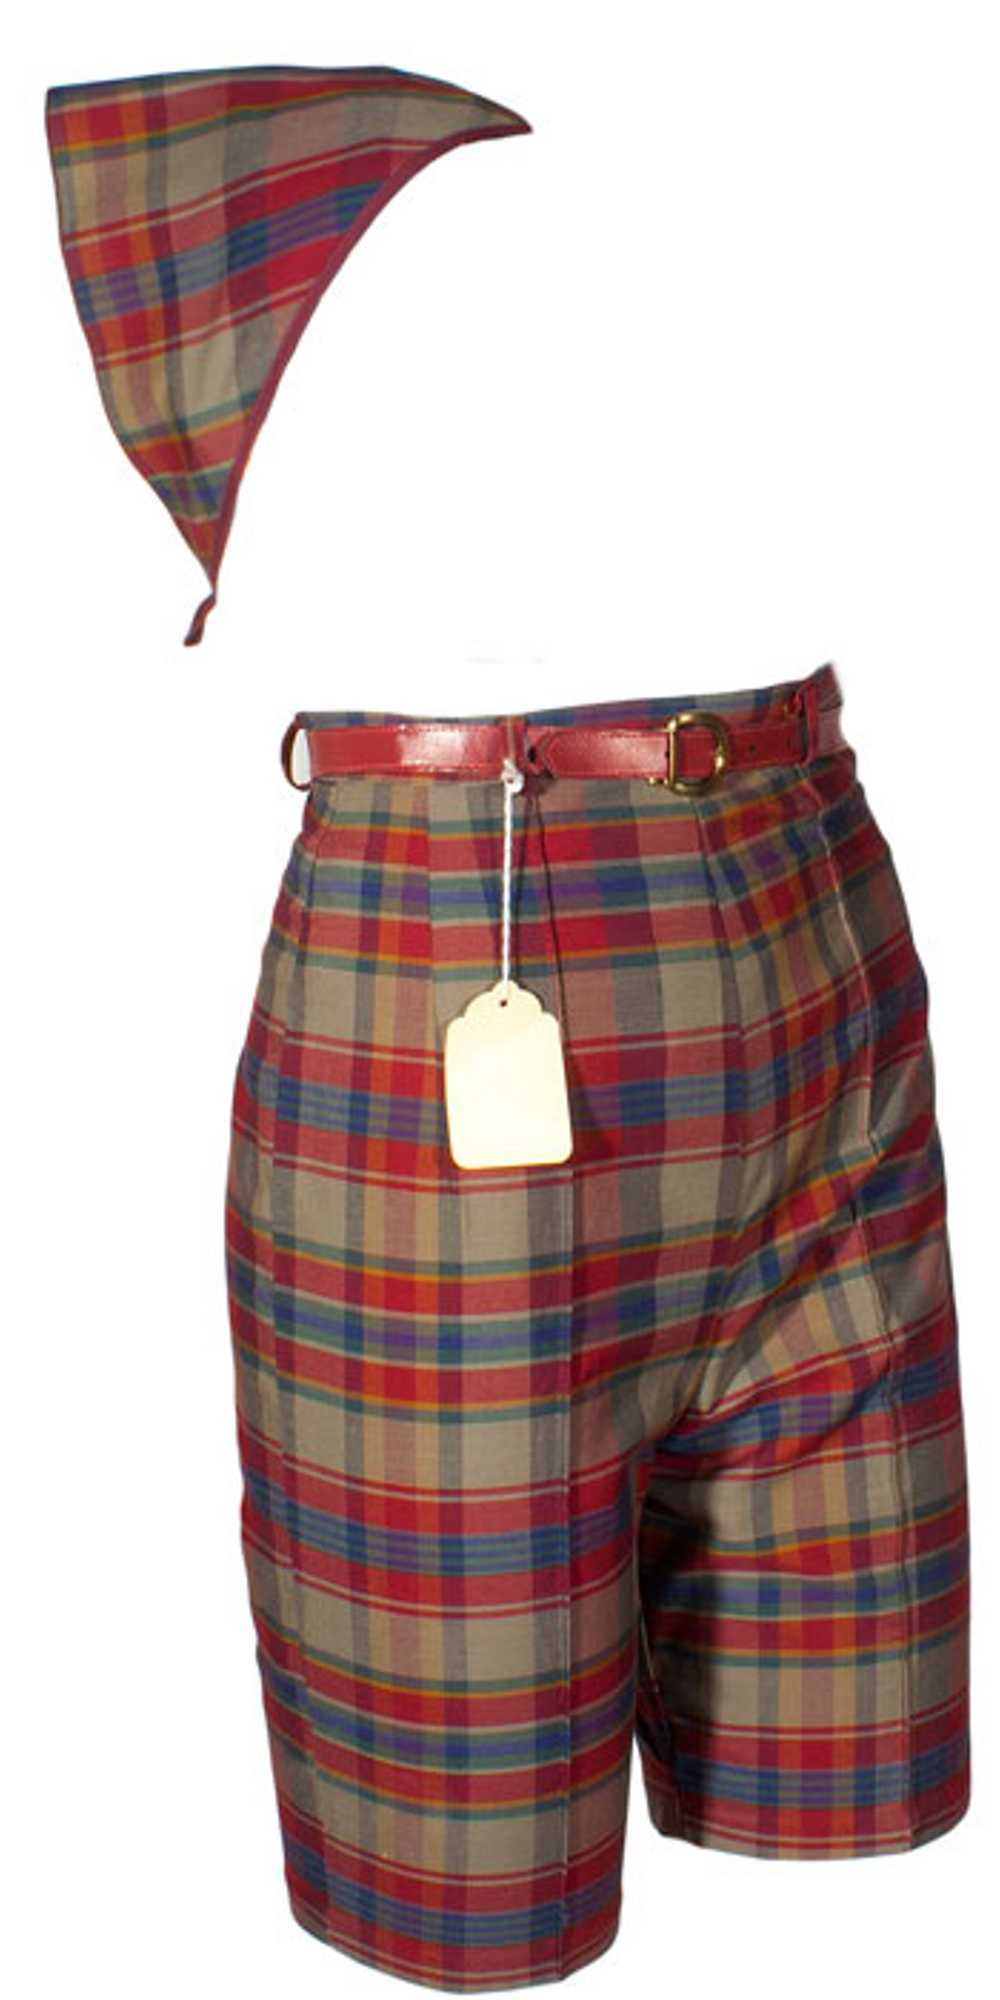 50s Camp Shorts with Scarf - image 2